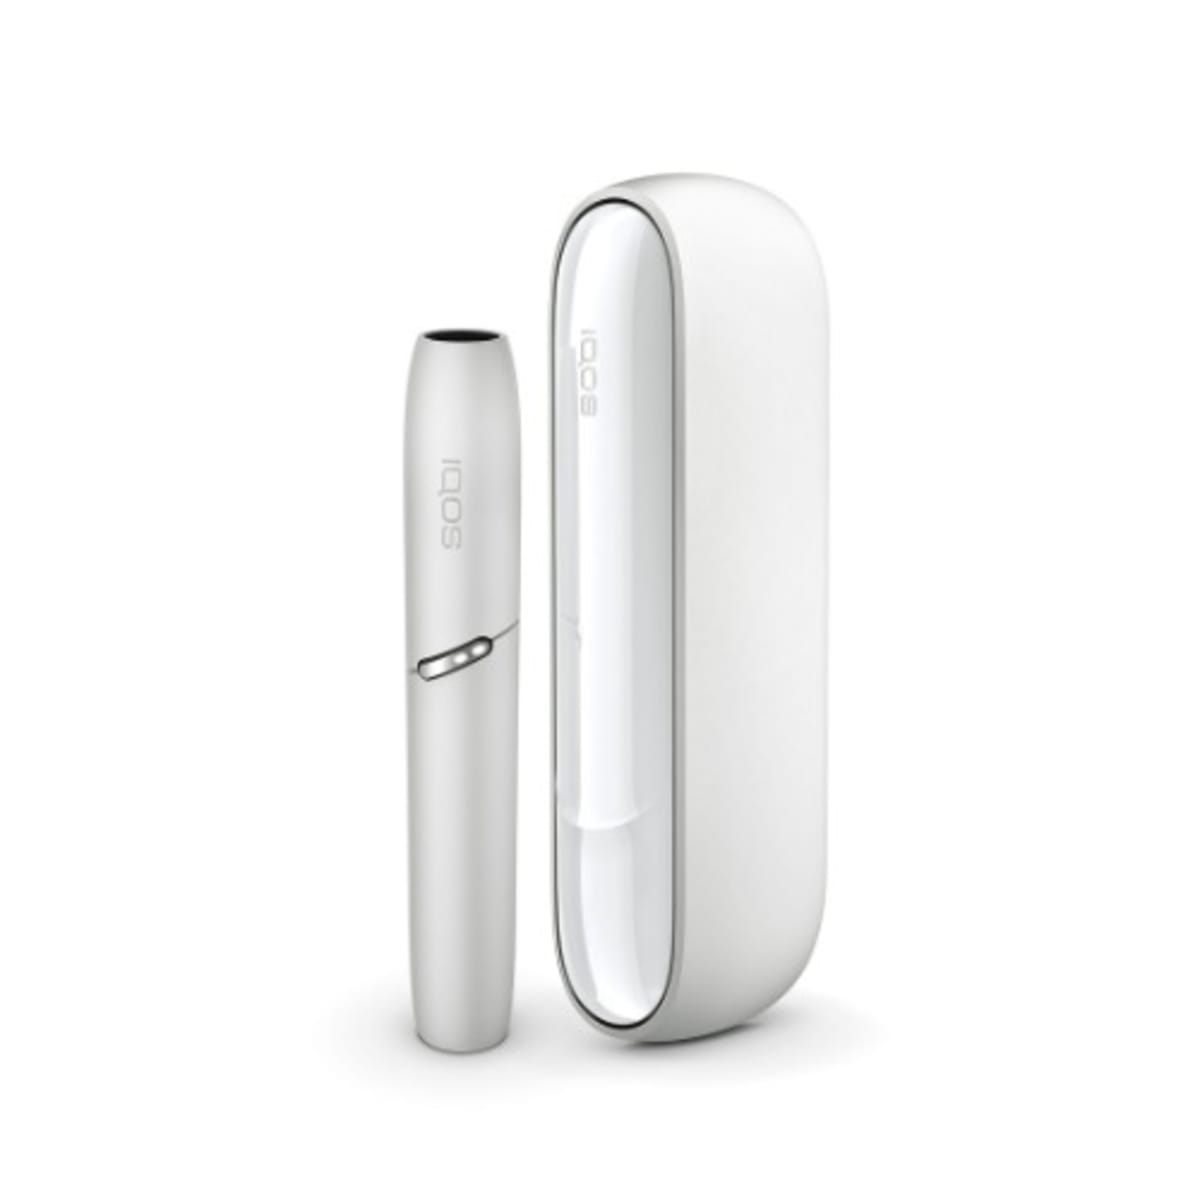 IQOS 3 DUO KIT OR